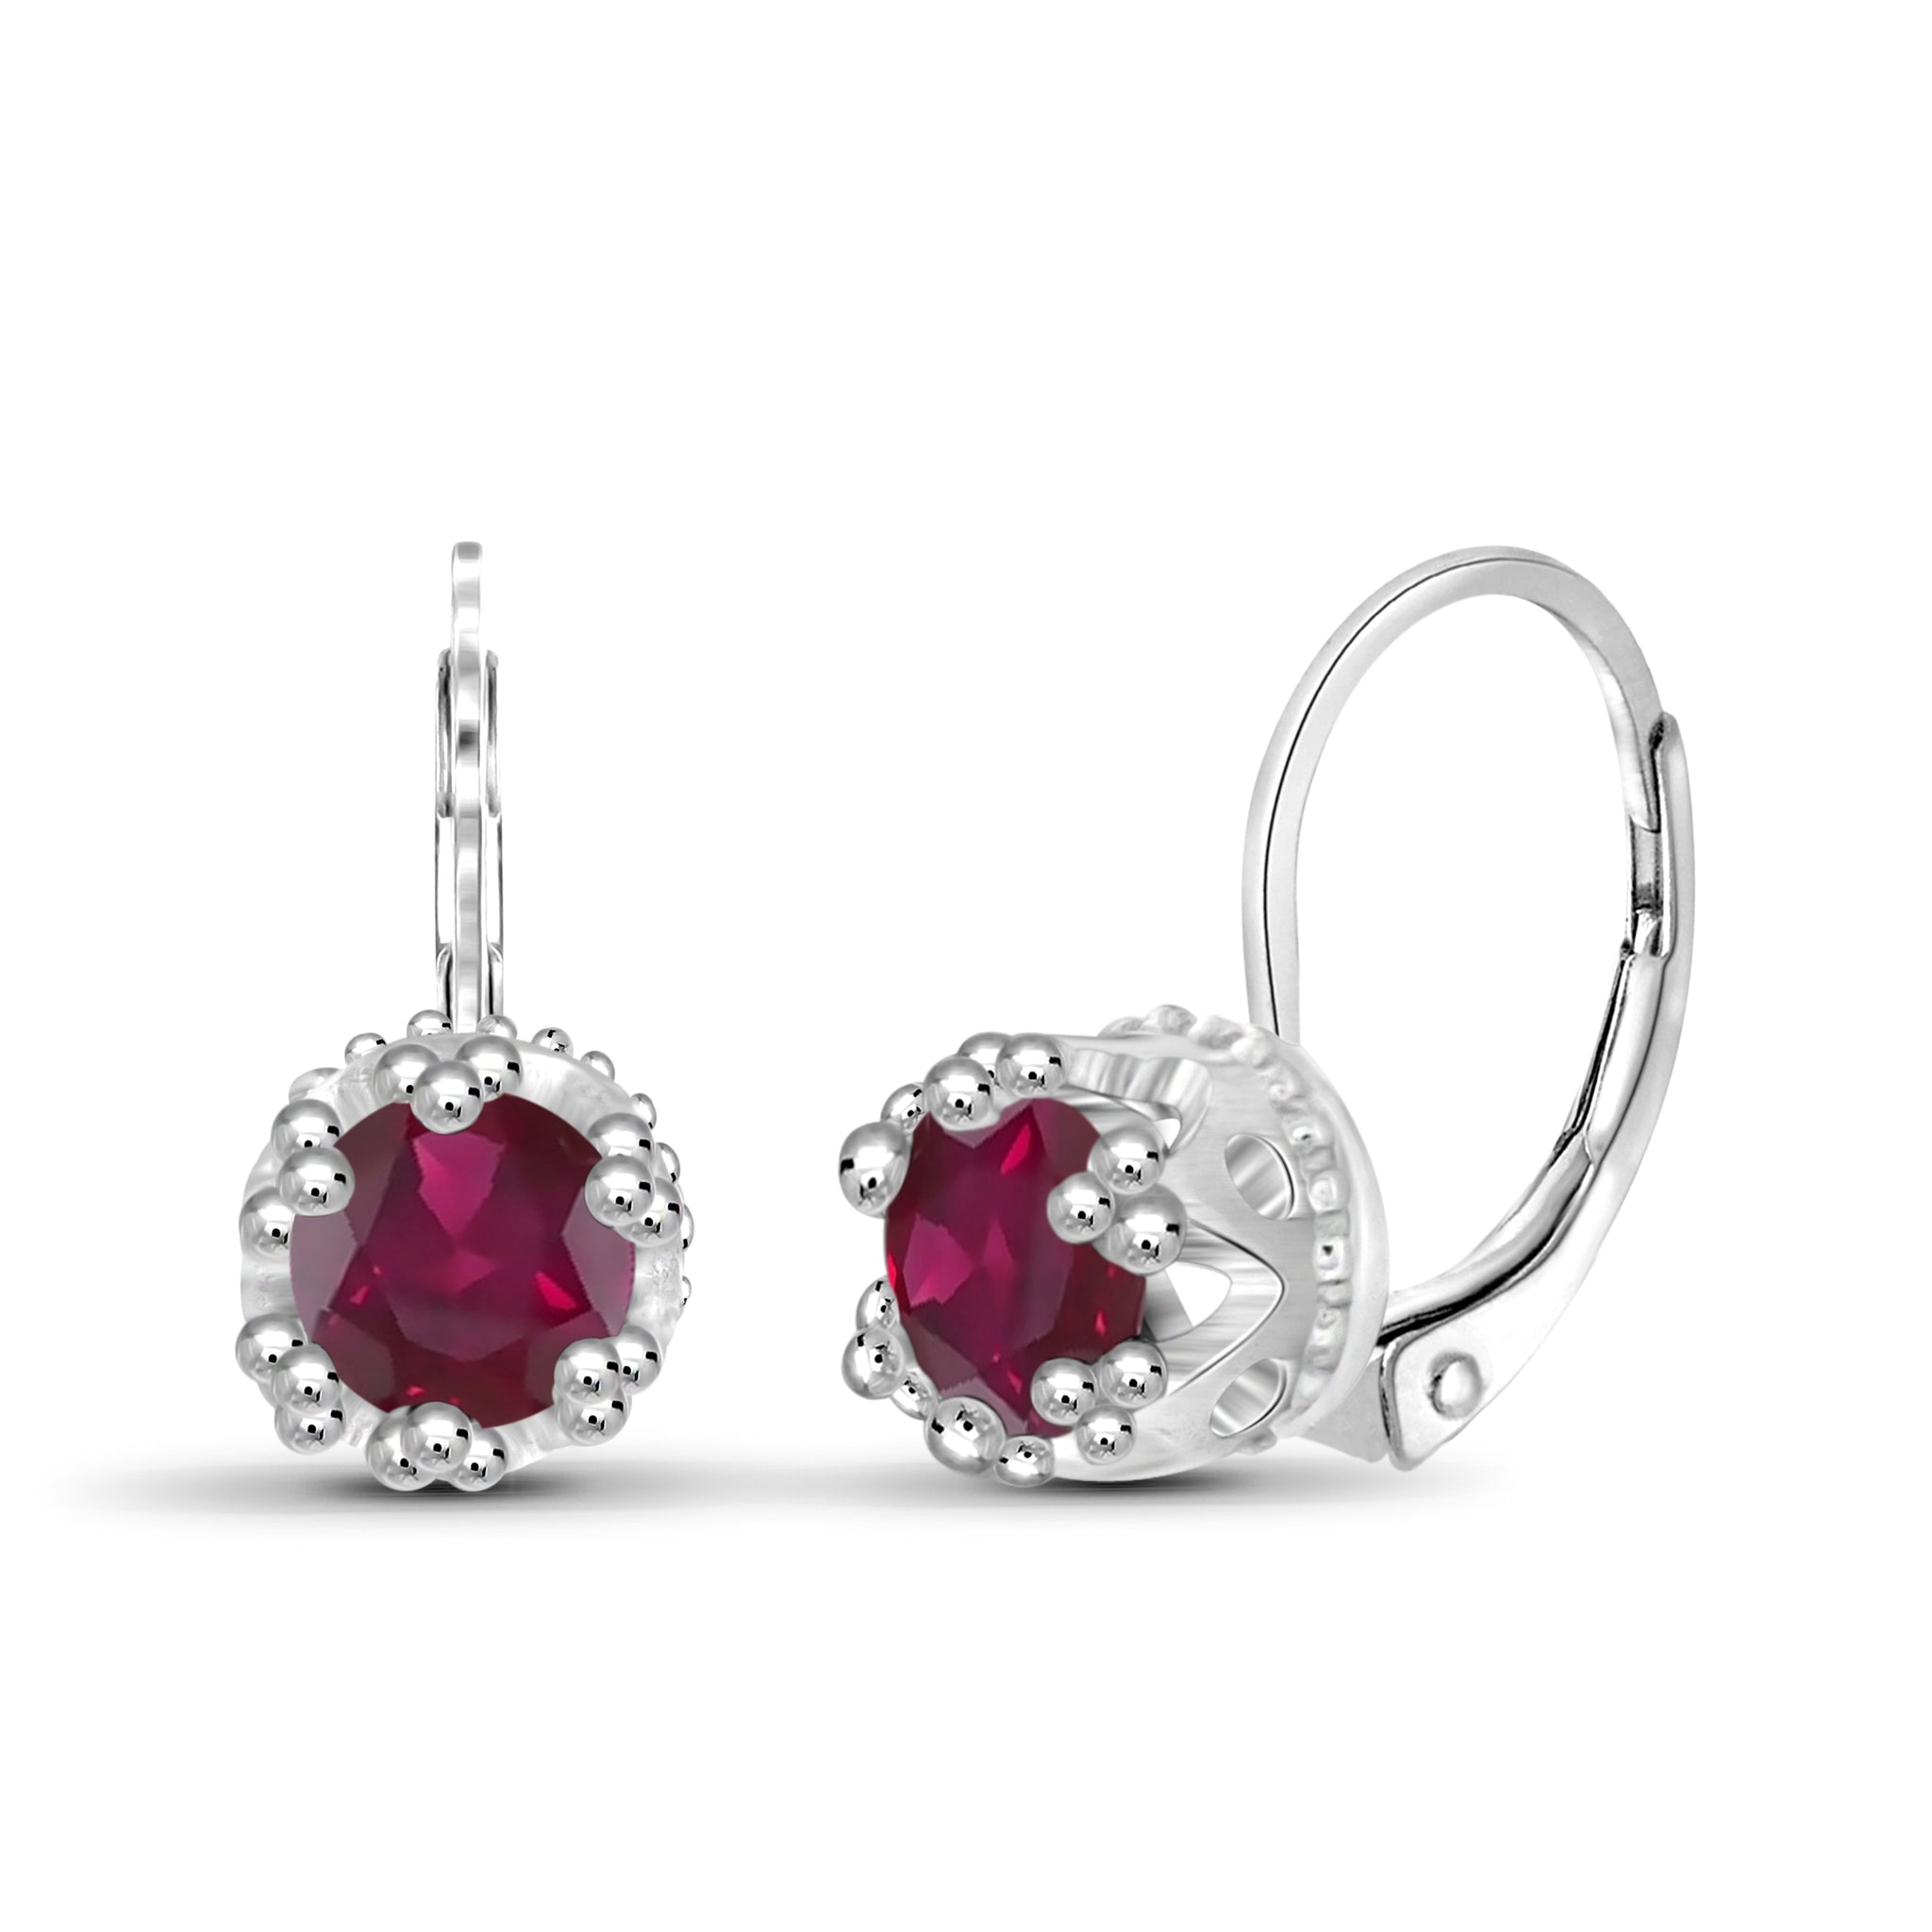 JewelonFire 1 1/3 Carat T.G.W. Ruby Sterling Silver Crown Earrings - Assorted Colors